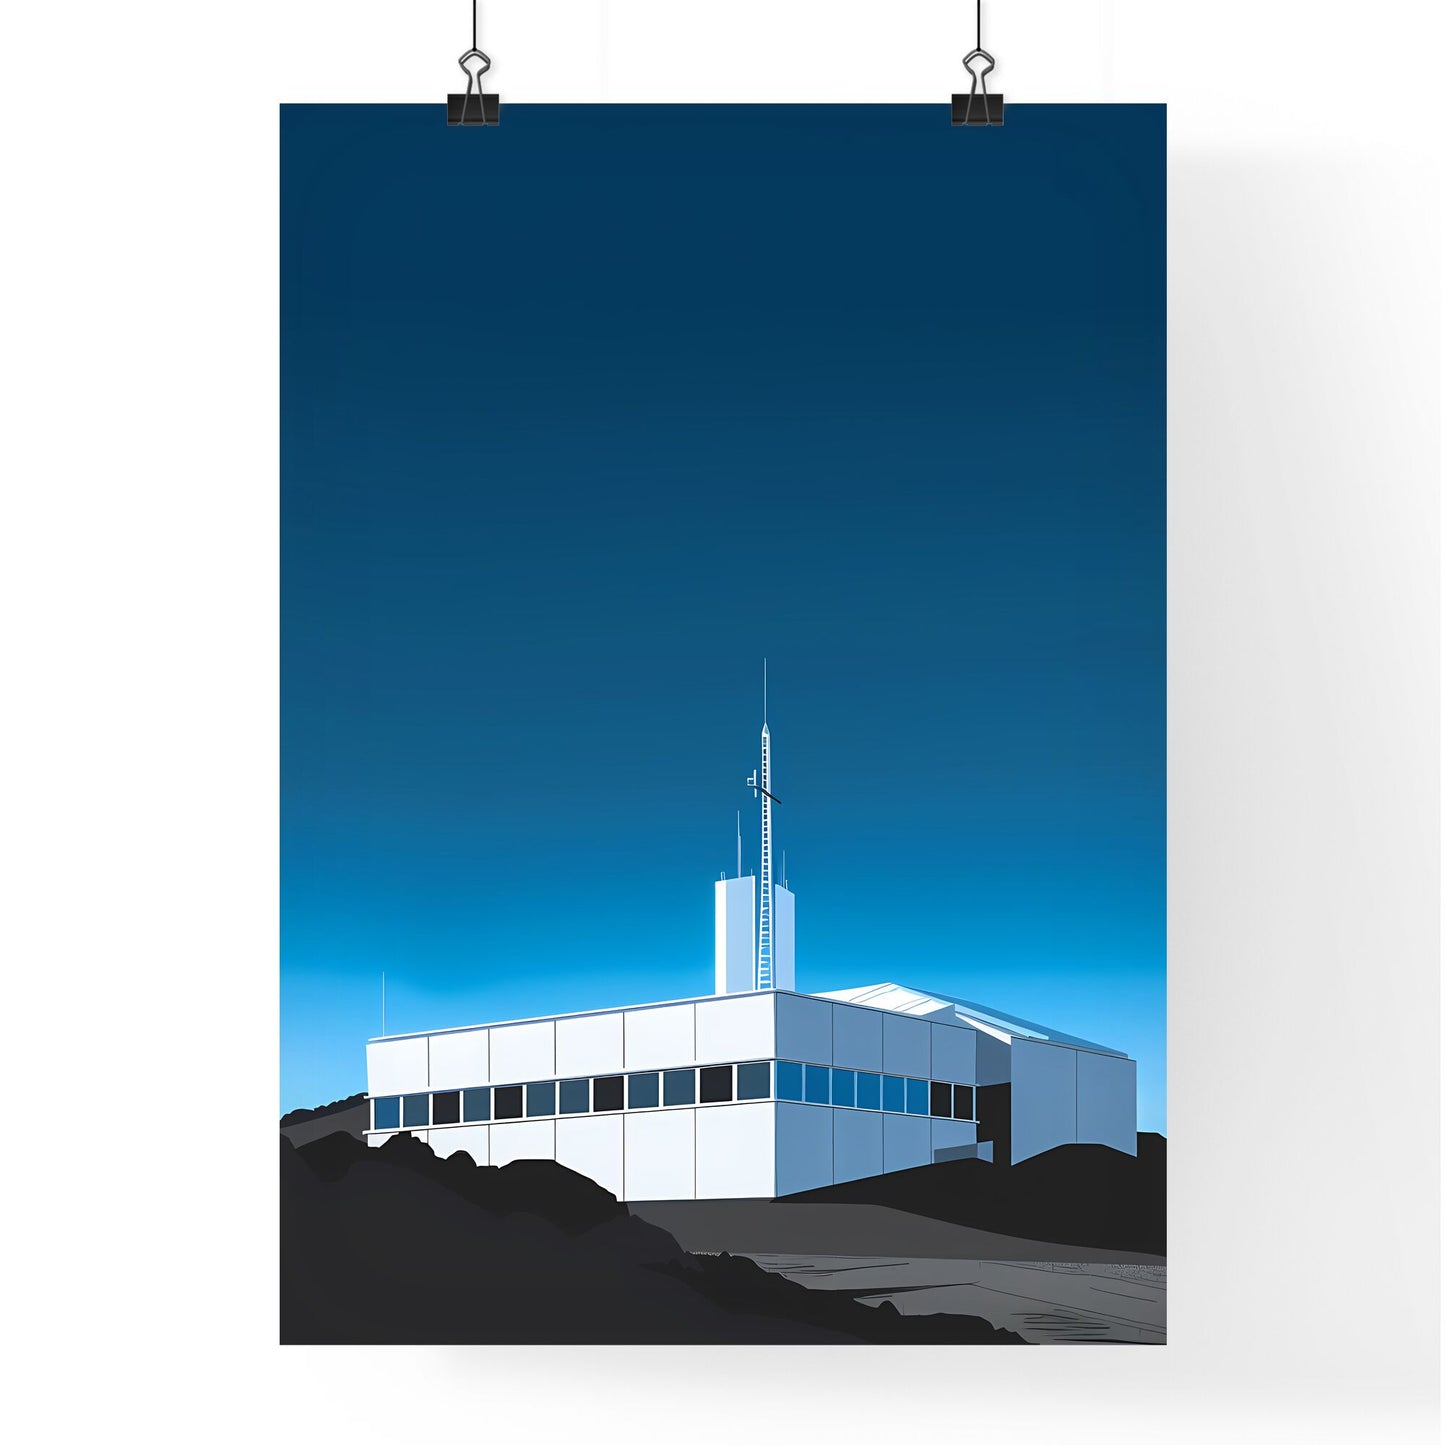 Vibrant Abstract Painting of a White Building with a Radio Tower and Cross on a Hill Default Title